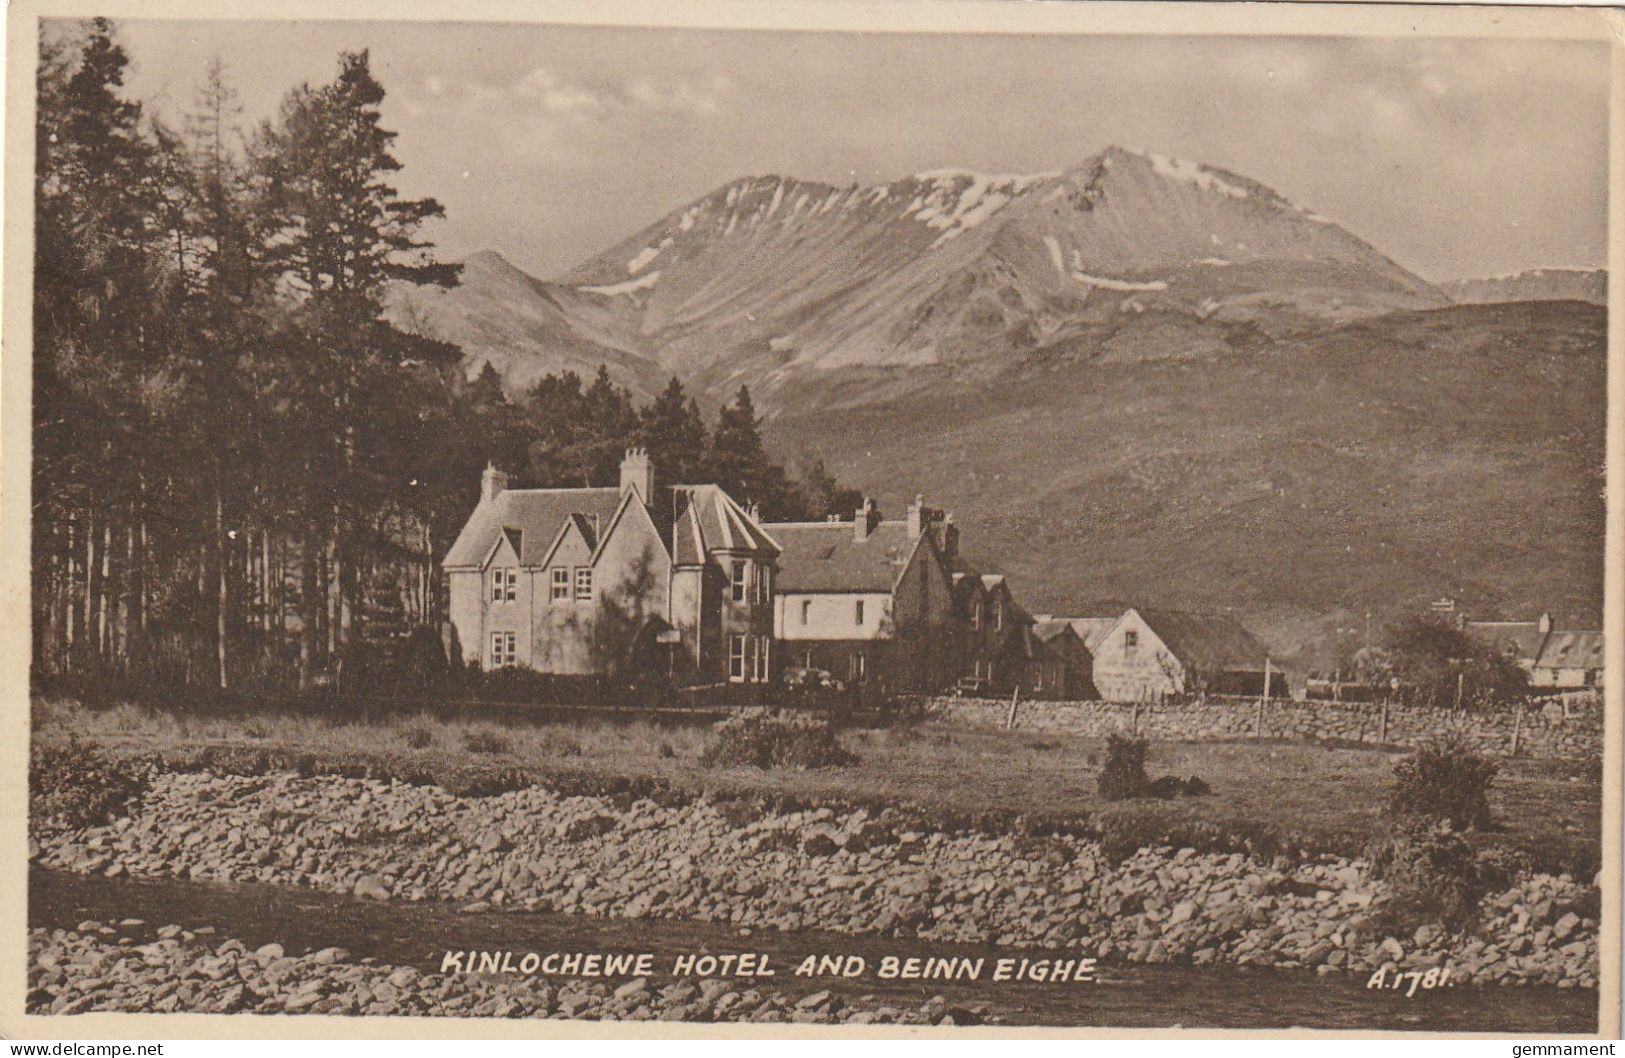 KINLOCHEWE HOTEL AND BEINN EIGHE - Ross & Cromarty